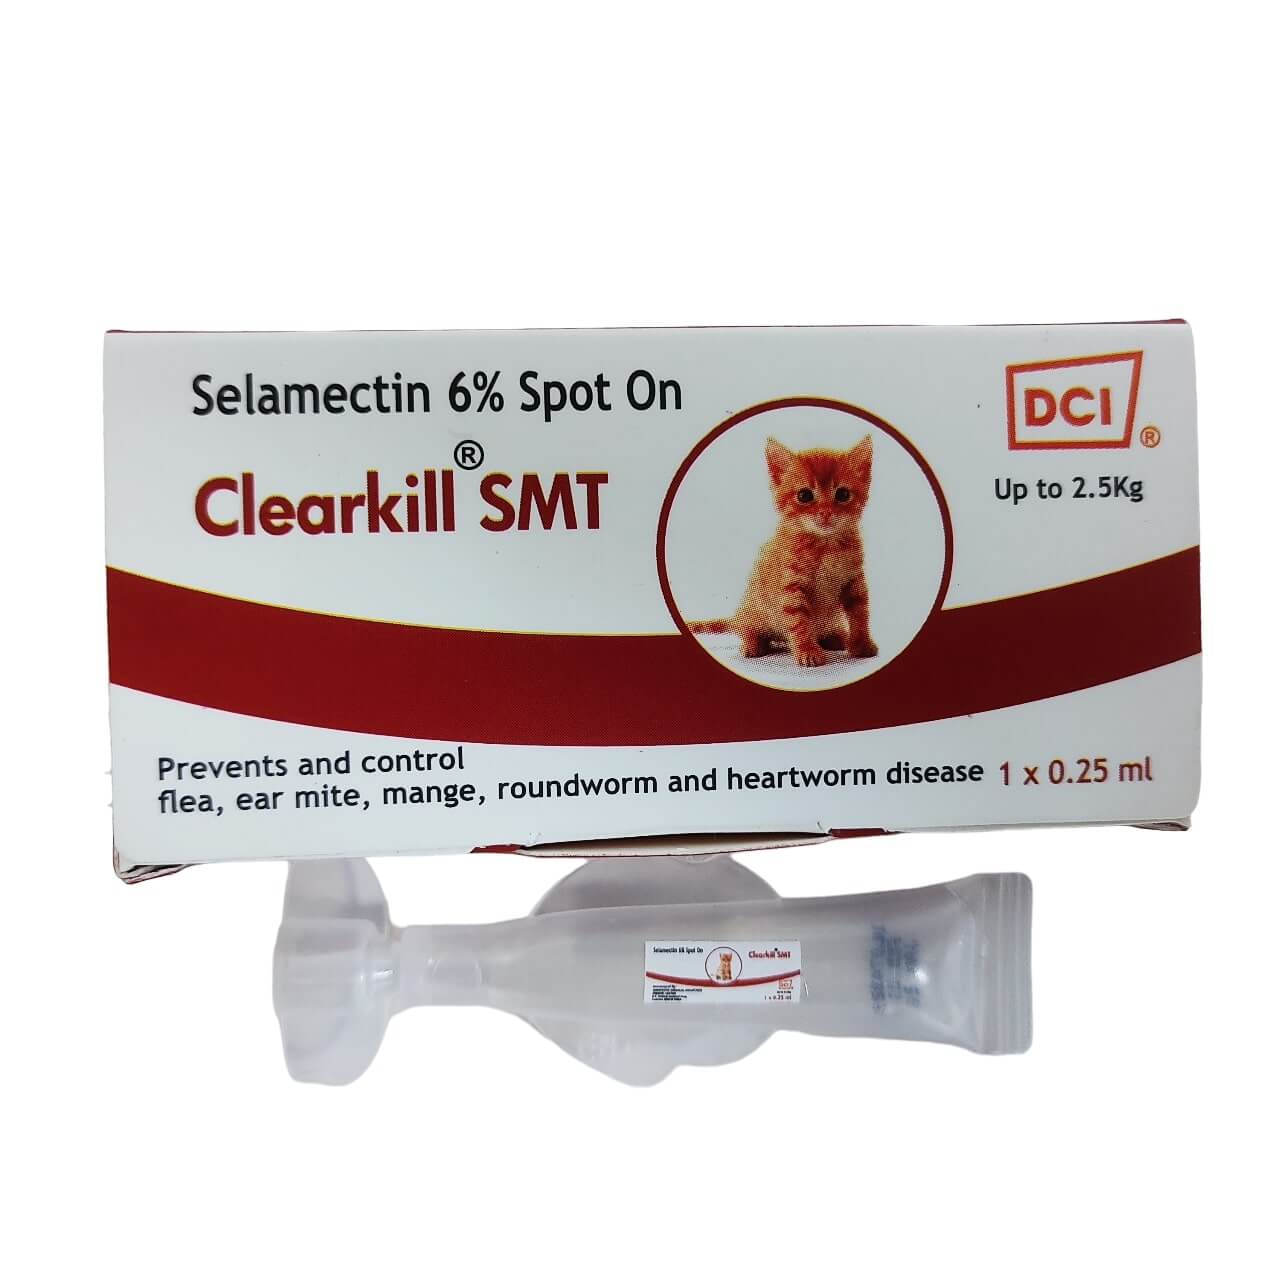 Selamectin 6 % Spot on for kittens and cats up to 2.5 kg